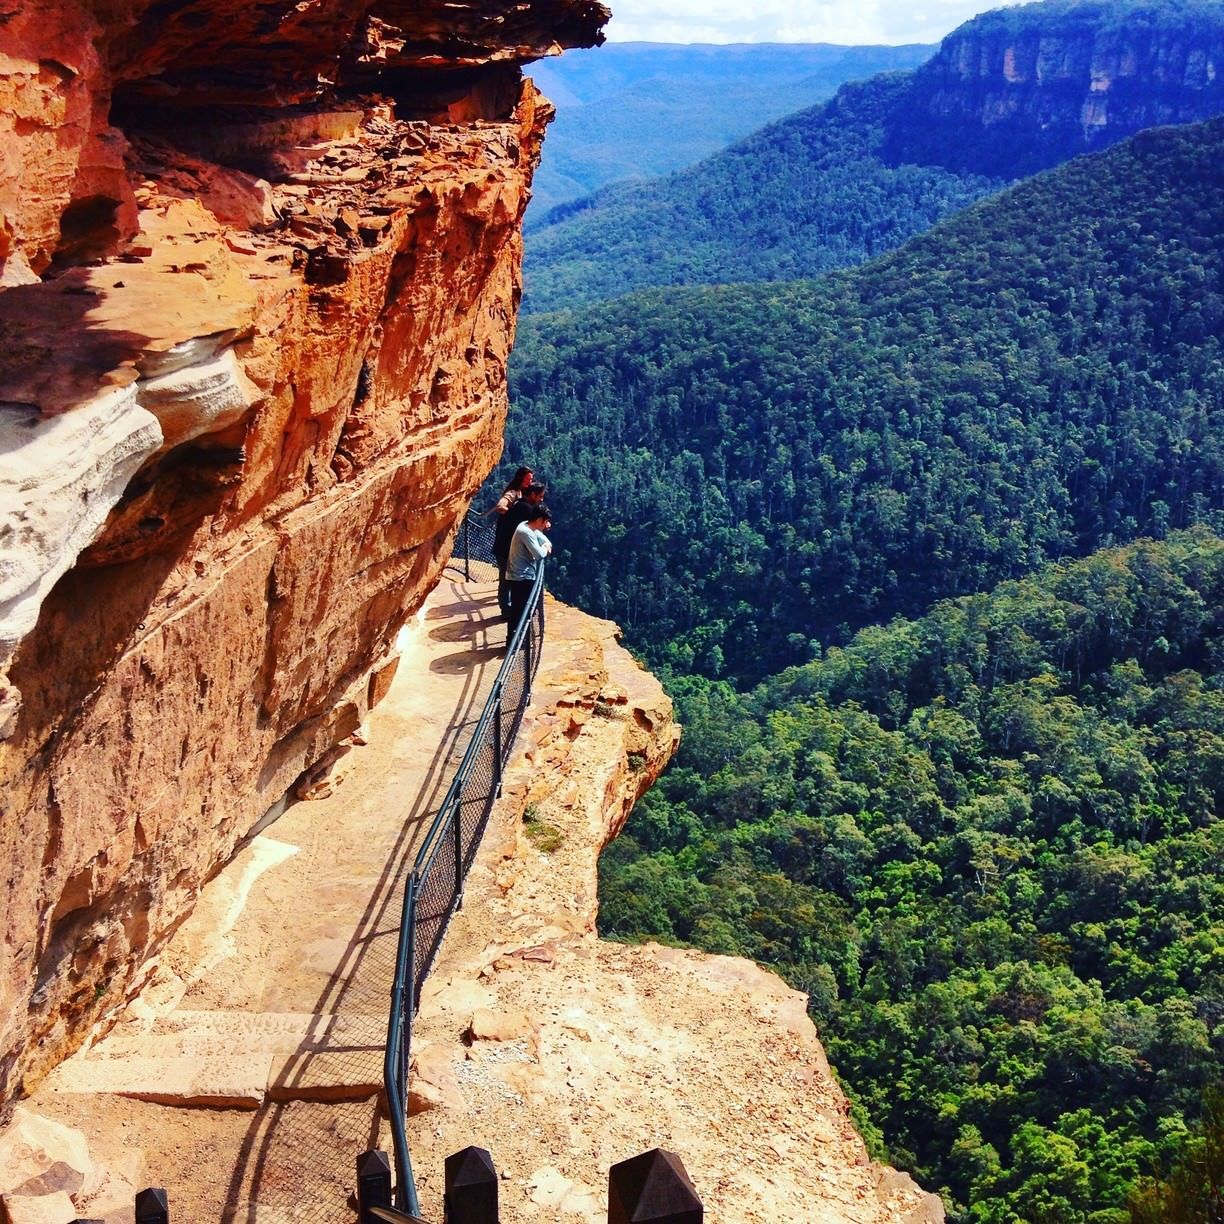 Group of people looking over a railing from a rock outcropping at Blue Mountains National Park Australia